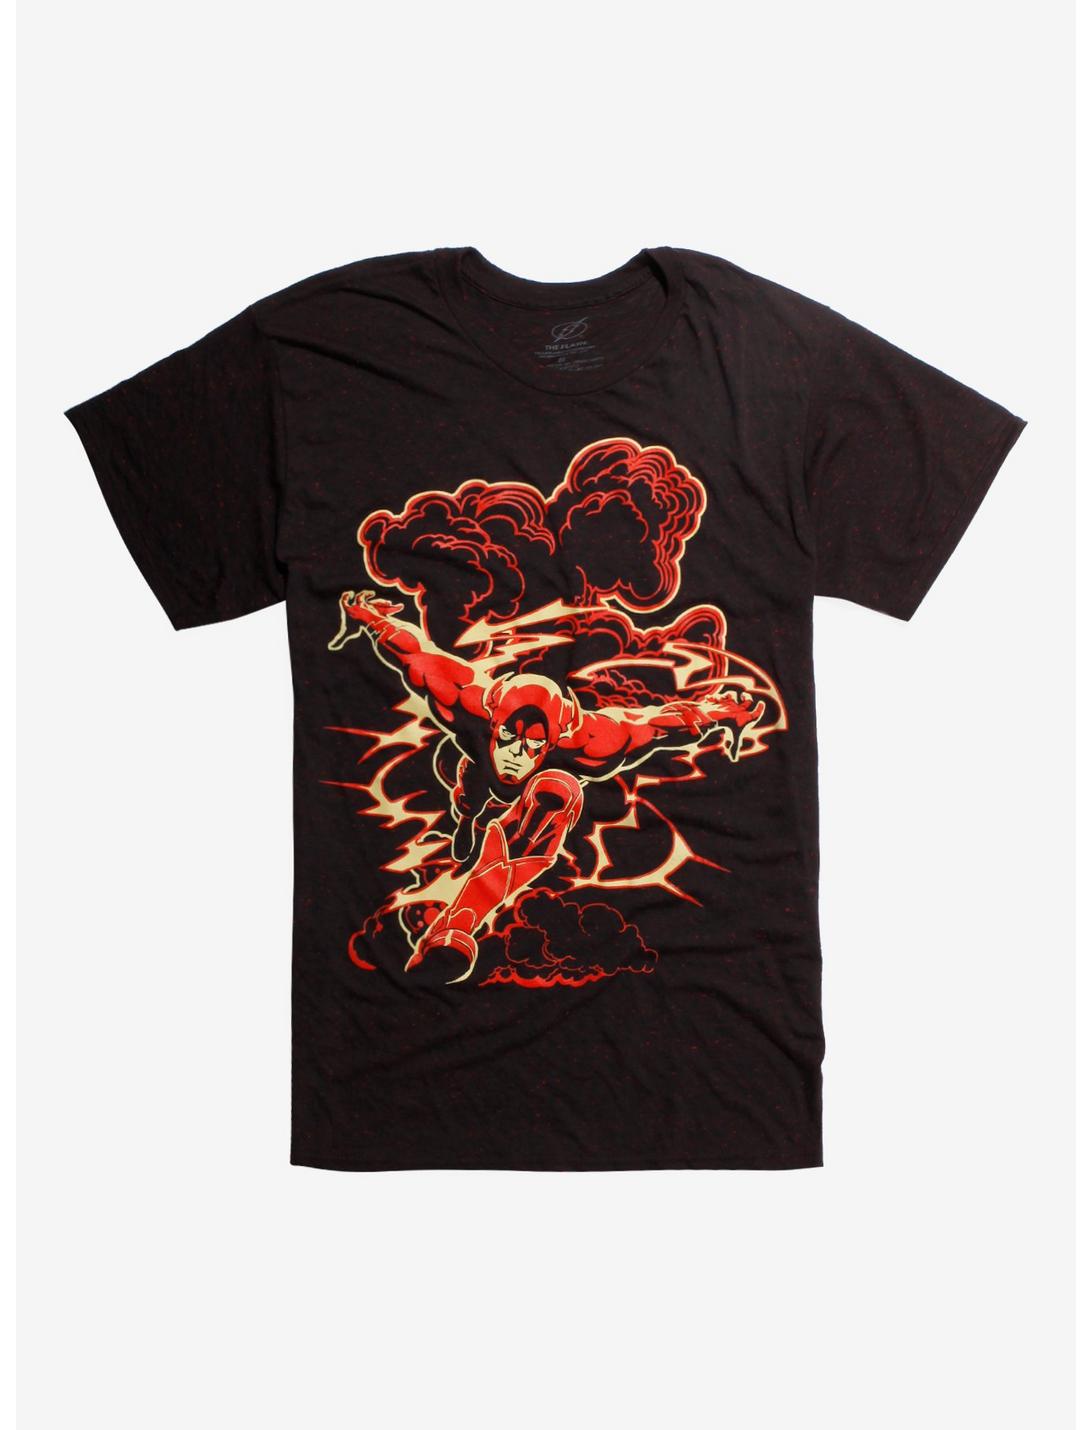 DC Comics The Flash Running Smoke Speckled T-Shirt Hot Topic Exclusive, BLACK, hi-res